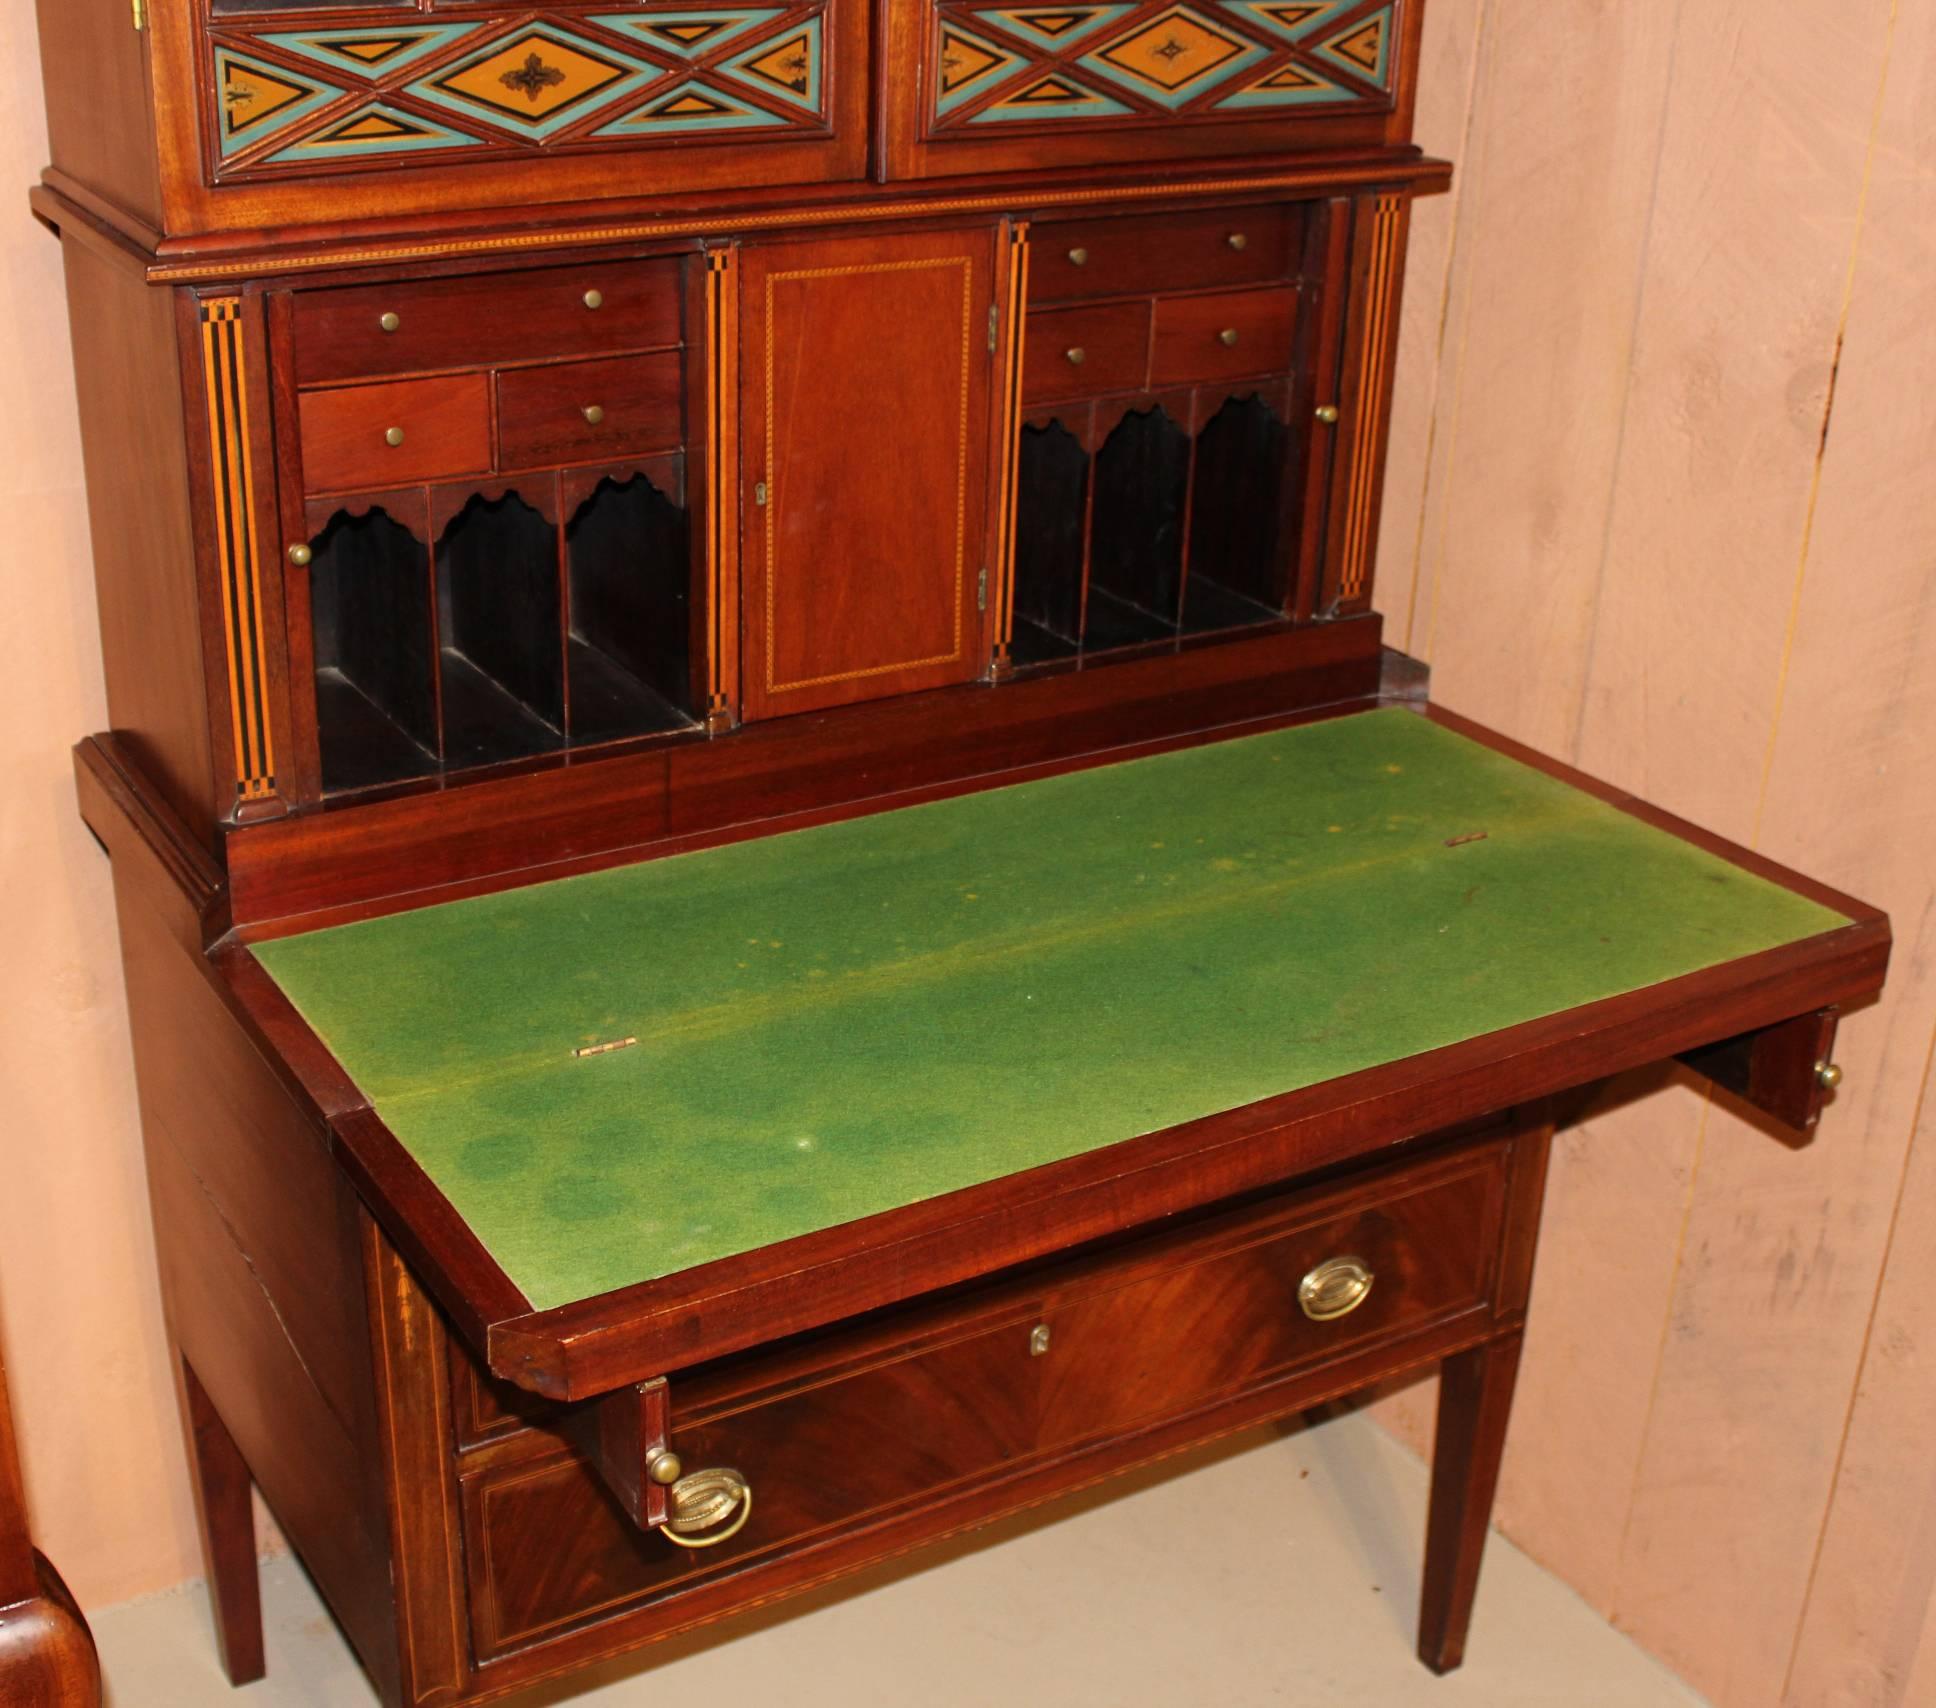 An exceptional three-piece Massachusetts (possibly Boston) Federal Period Hepplewhite mahogany inlaid secretary in three parts. The upper section with
stepped crest and finials surmounting a molded frieze above Gothic glazed doors with geometric